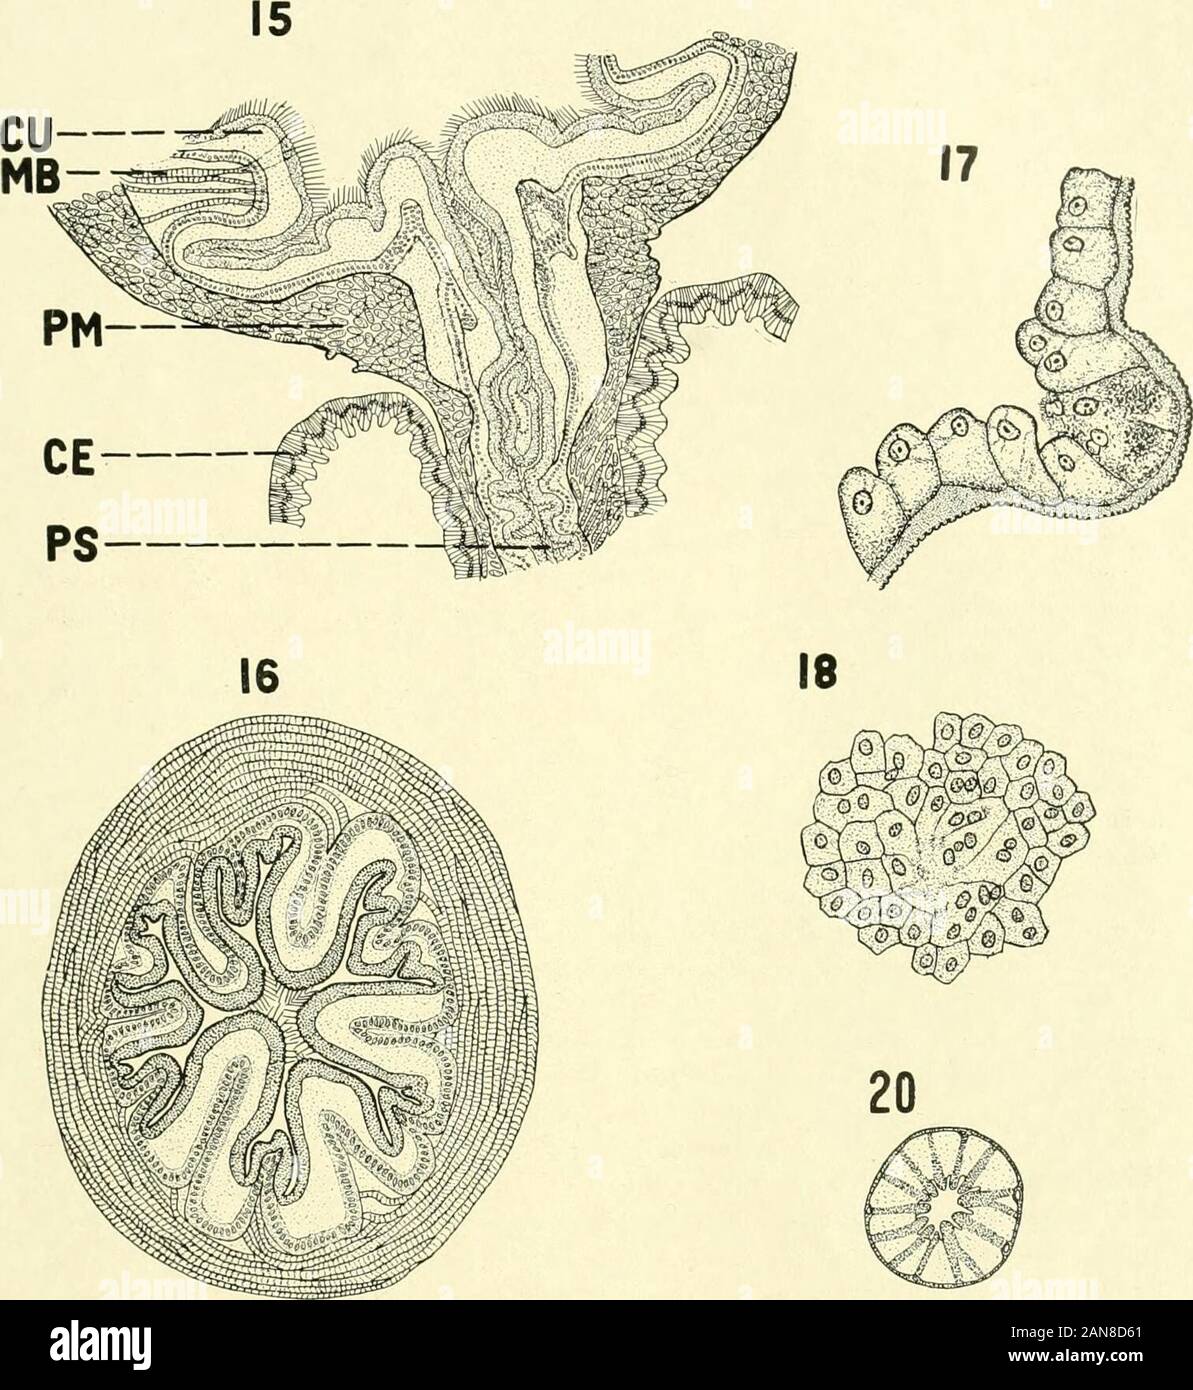 The Journal of experimental zoology . f the epithelium. Flemming. Acid fuchsin.325 diam. IS Surface view of epithelium of the crop, showing unusual conditions.Several binucleate cells are present, and also a region of cytoplasm where cellwalls are lacking. Perenyi. Ehrlichs haematoxylin. 200 diam. 19 Transverse section of stomach two days after ingestion of fat. Theepithelium shows frequent dark regions which indicate absorption of fat here.The lumen of the stomach contains oil drops, pieces of chitin, and other sub-stances. Hemming. Acid fuchsin. 35 diam. 20 Transverse section of a caecum, pr Stock Photo